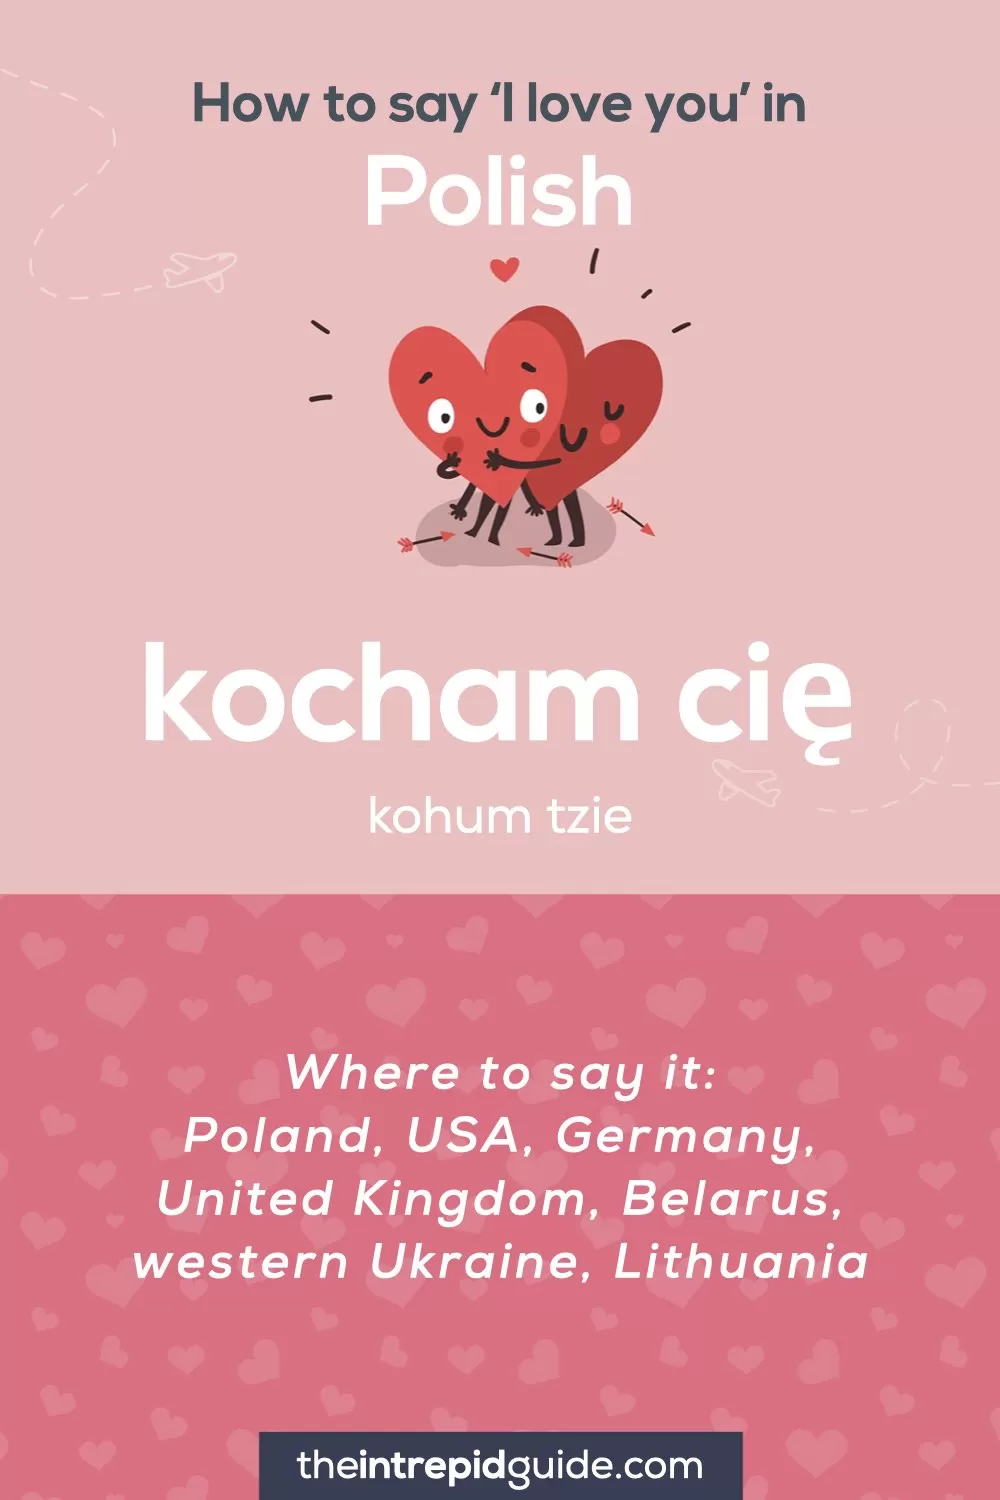 How to say I love you in different languages - Polish - kocham cię